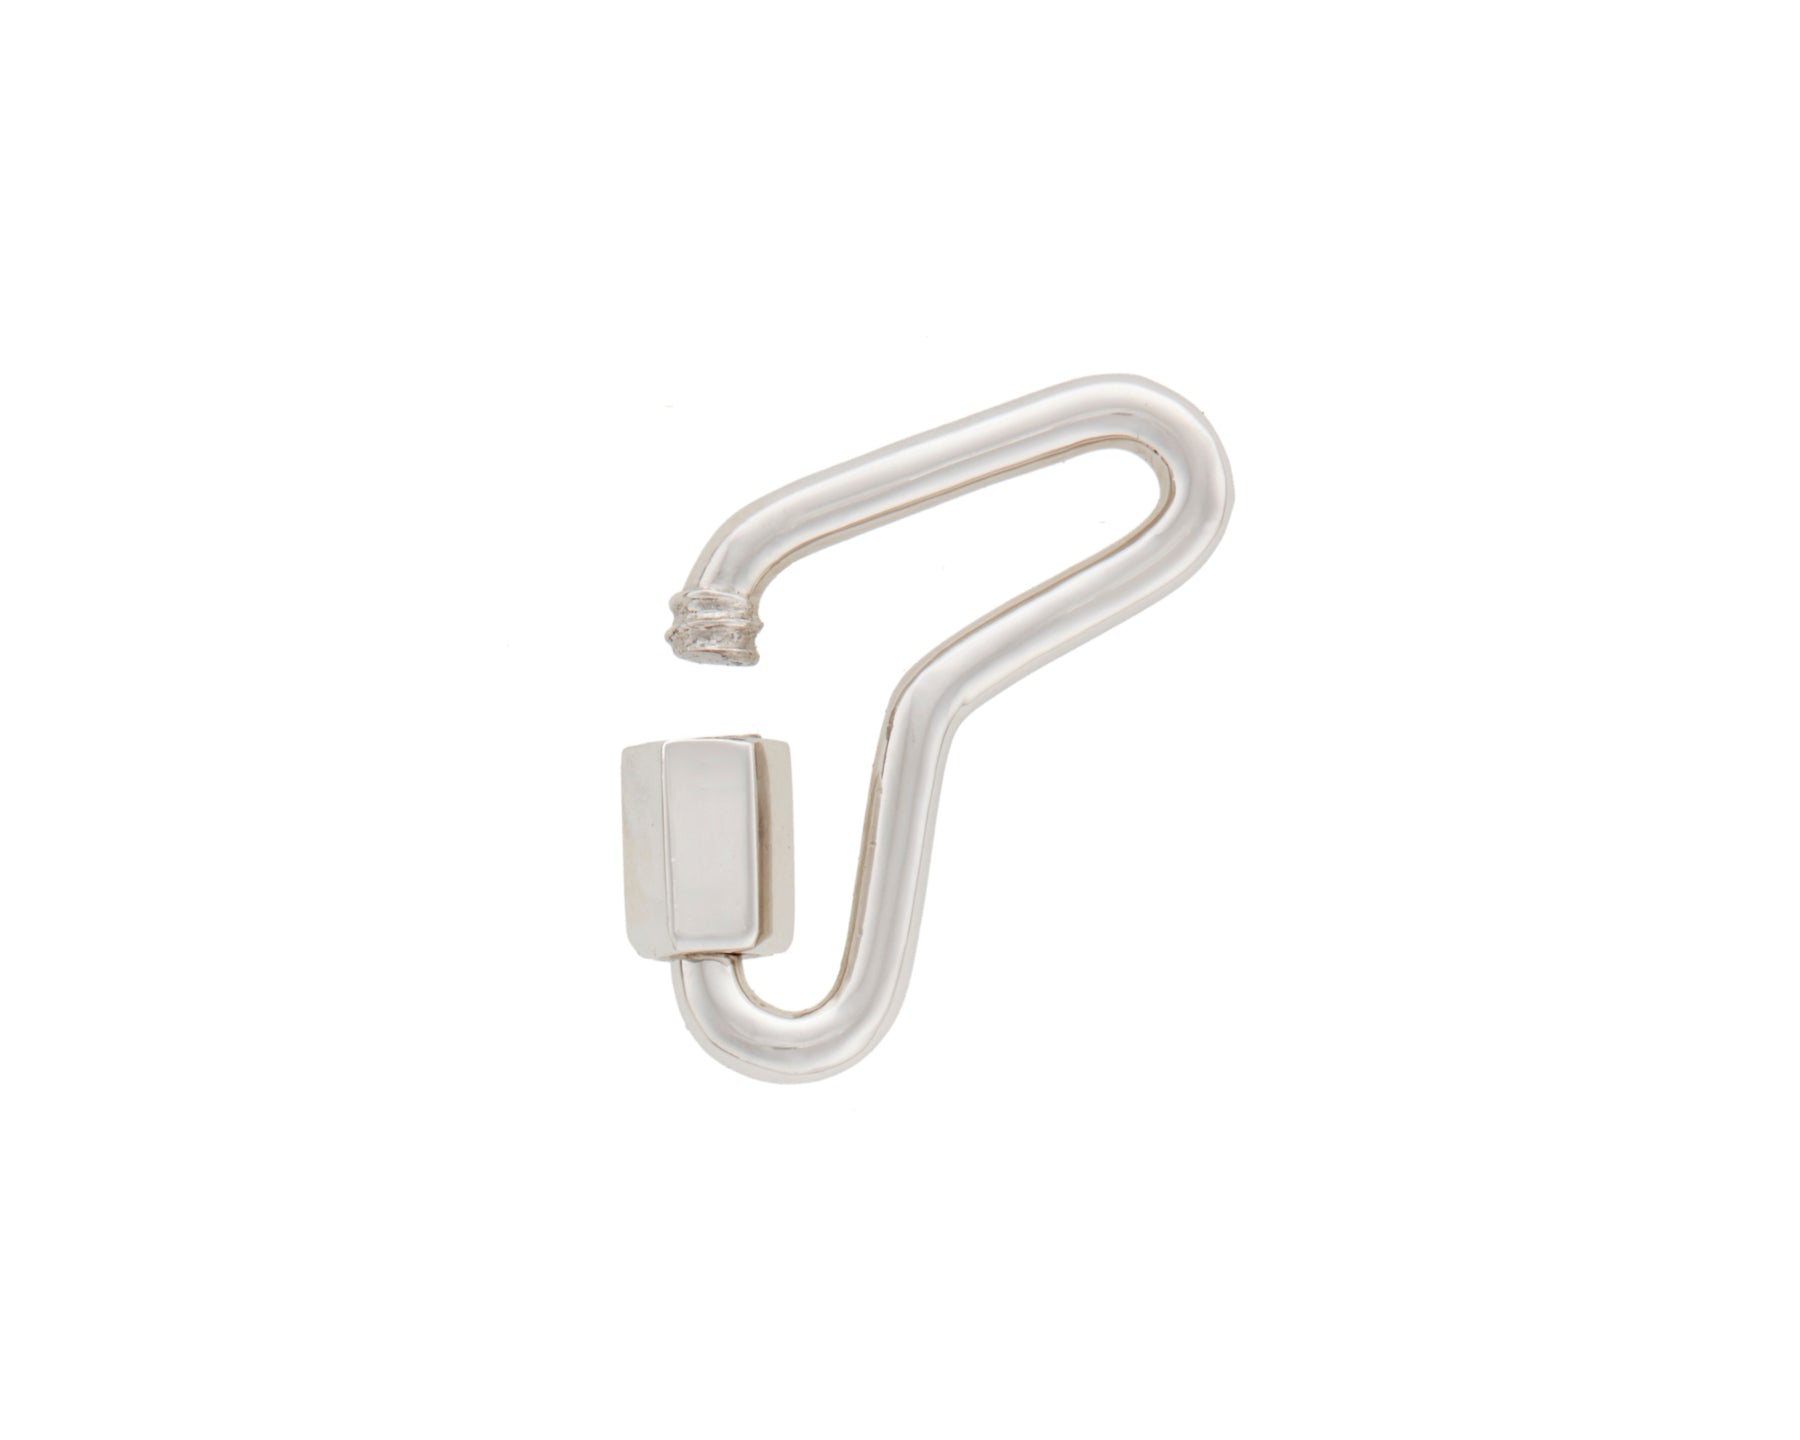 Silver boomerang charm with open clasp